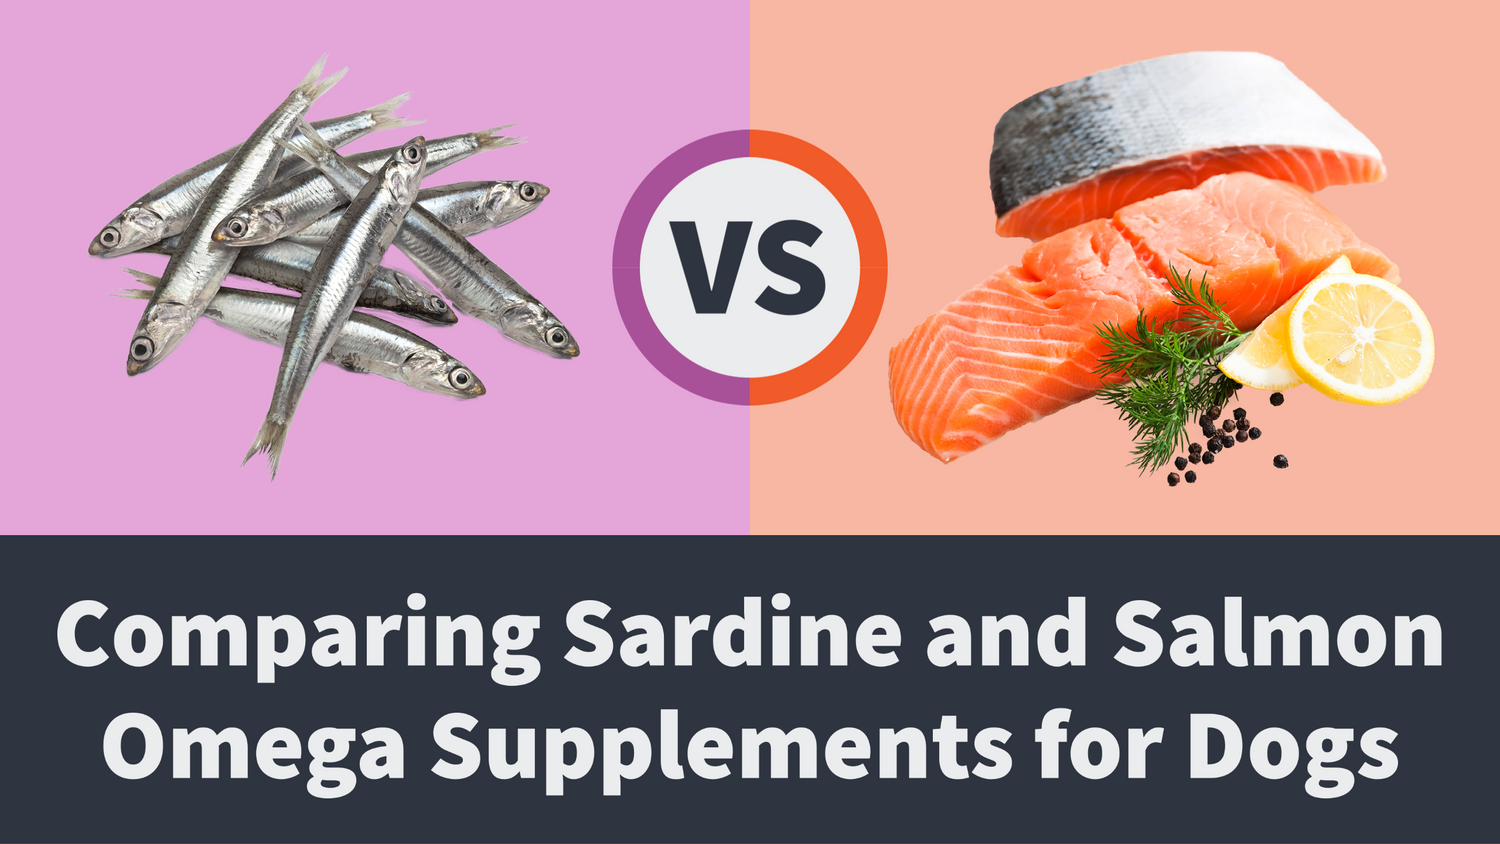 Images of sardines and salmon with letters VS in between and a box with text “Comparing Sardine and Salmon Omega Supplements”